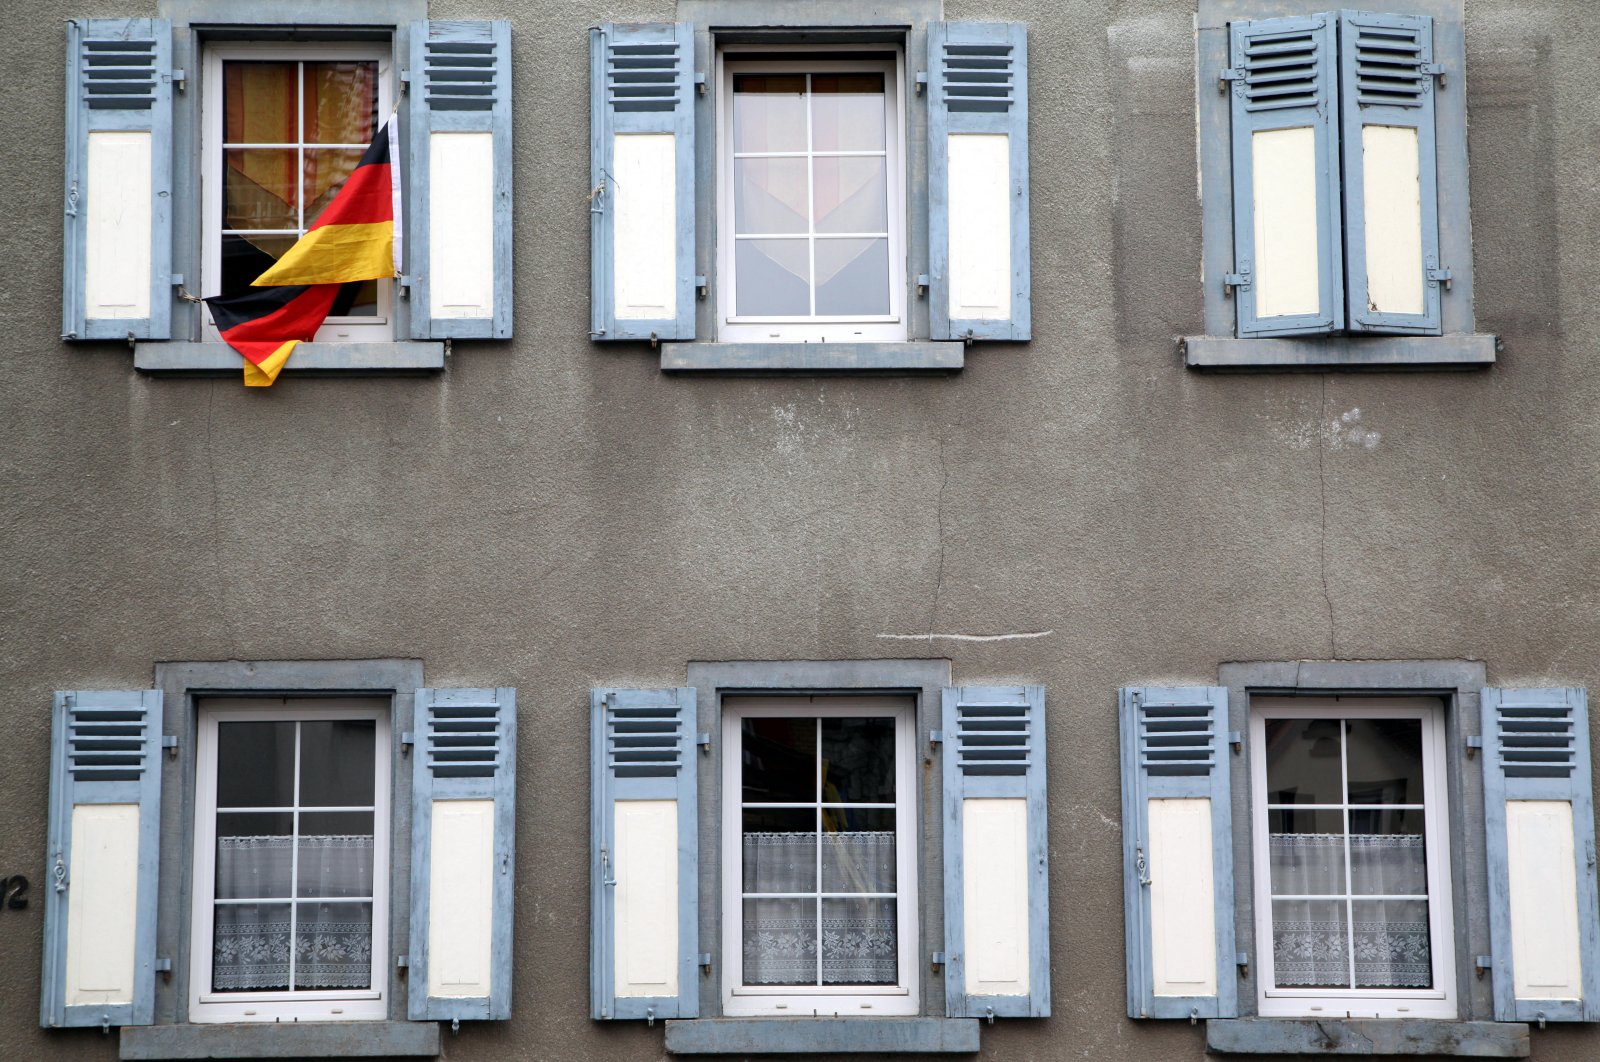 A German flag waves outside a window in this undated photo. (Reuters Photo)